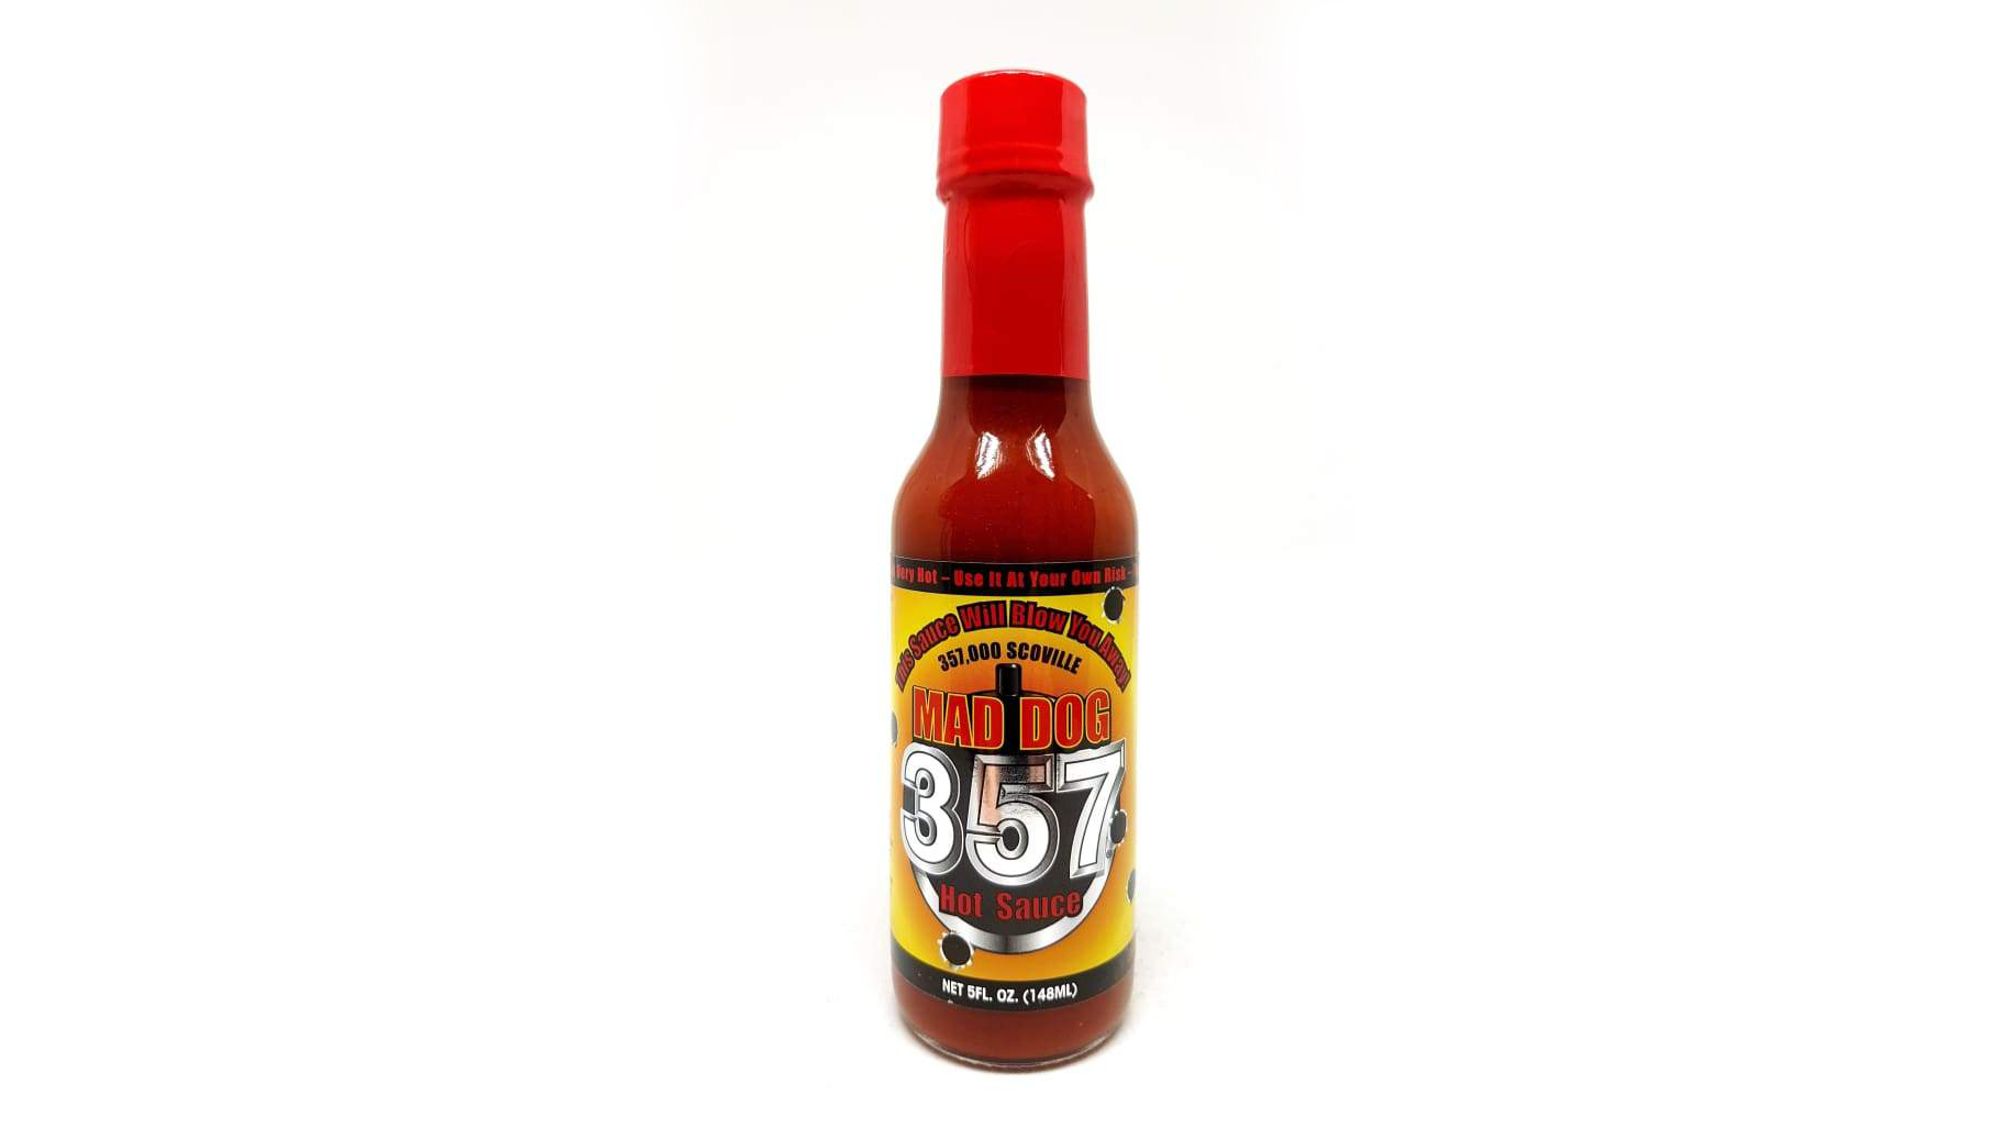 mad-dog-357-hot-sauce-heat-level-09-ones-meta-related-collection-ashley-foods-chilly-chiles-largest-selection-of-in-canada-condiment-sauces-flavor-ingredient_827 copy.jpg